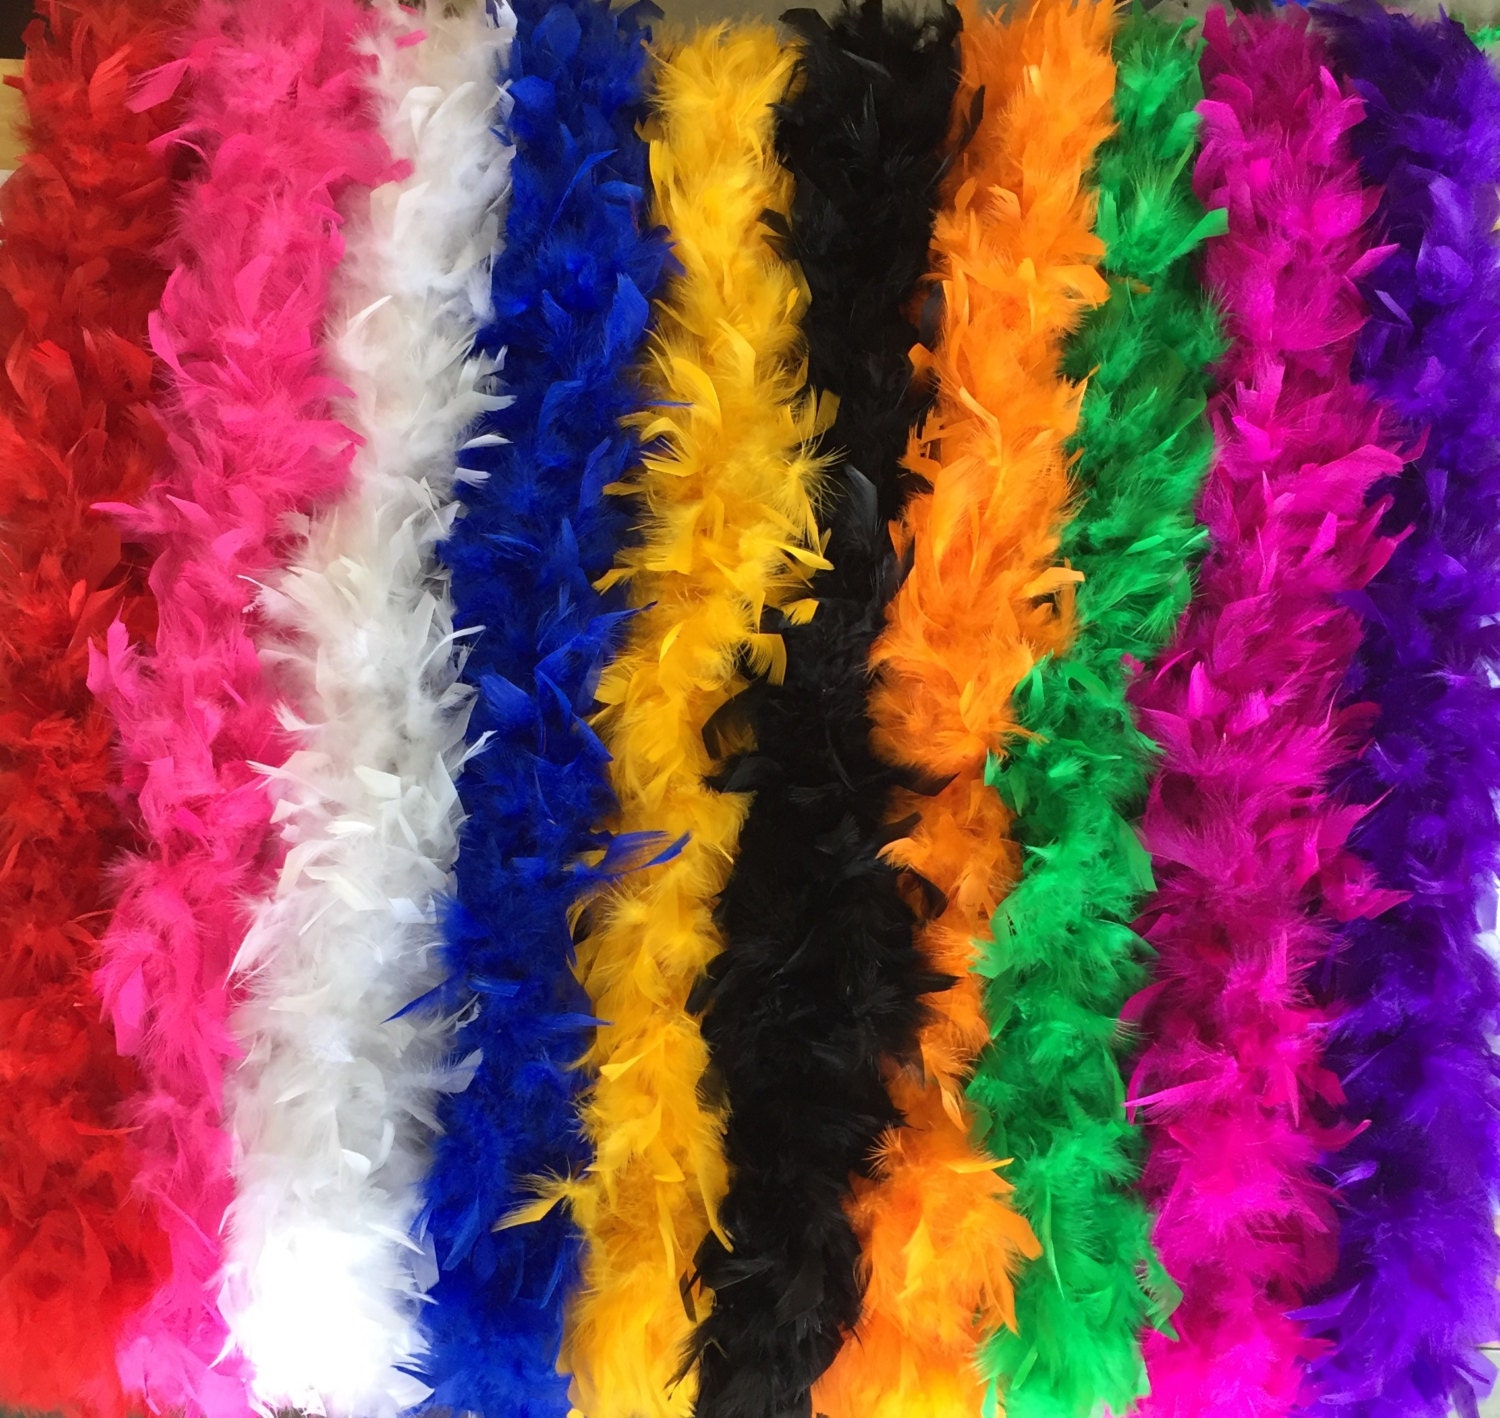  Mardi Gras Feather Boa 2 Pcs 78.74 Inches Long Feather Boa Kids  for Mardi Gras Theme Office Decor Costume Wedding Party Decoration DIY  Crafts, Yellow, Green, Purple, 40 Grams : Arts